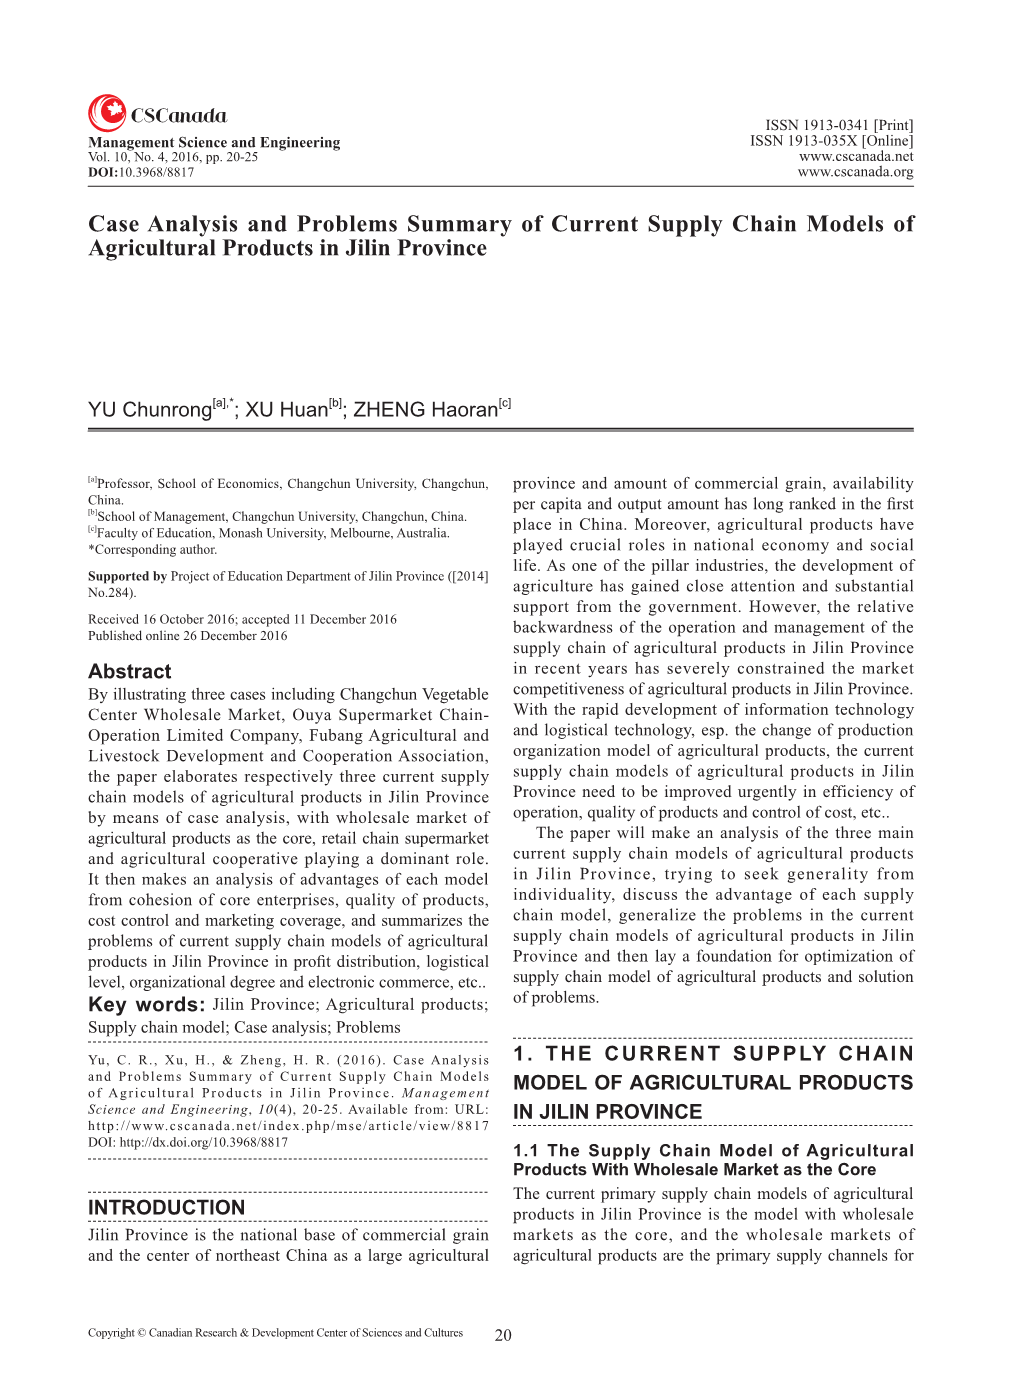 Case Analysis and Problems Summary of Current Supply Chain Models of Agricultural Products in Jilin Province